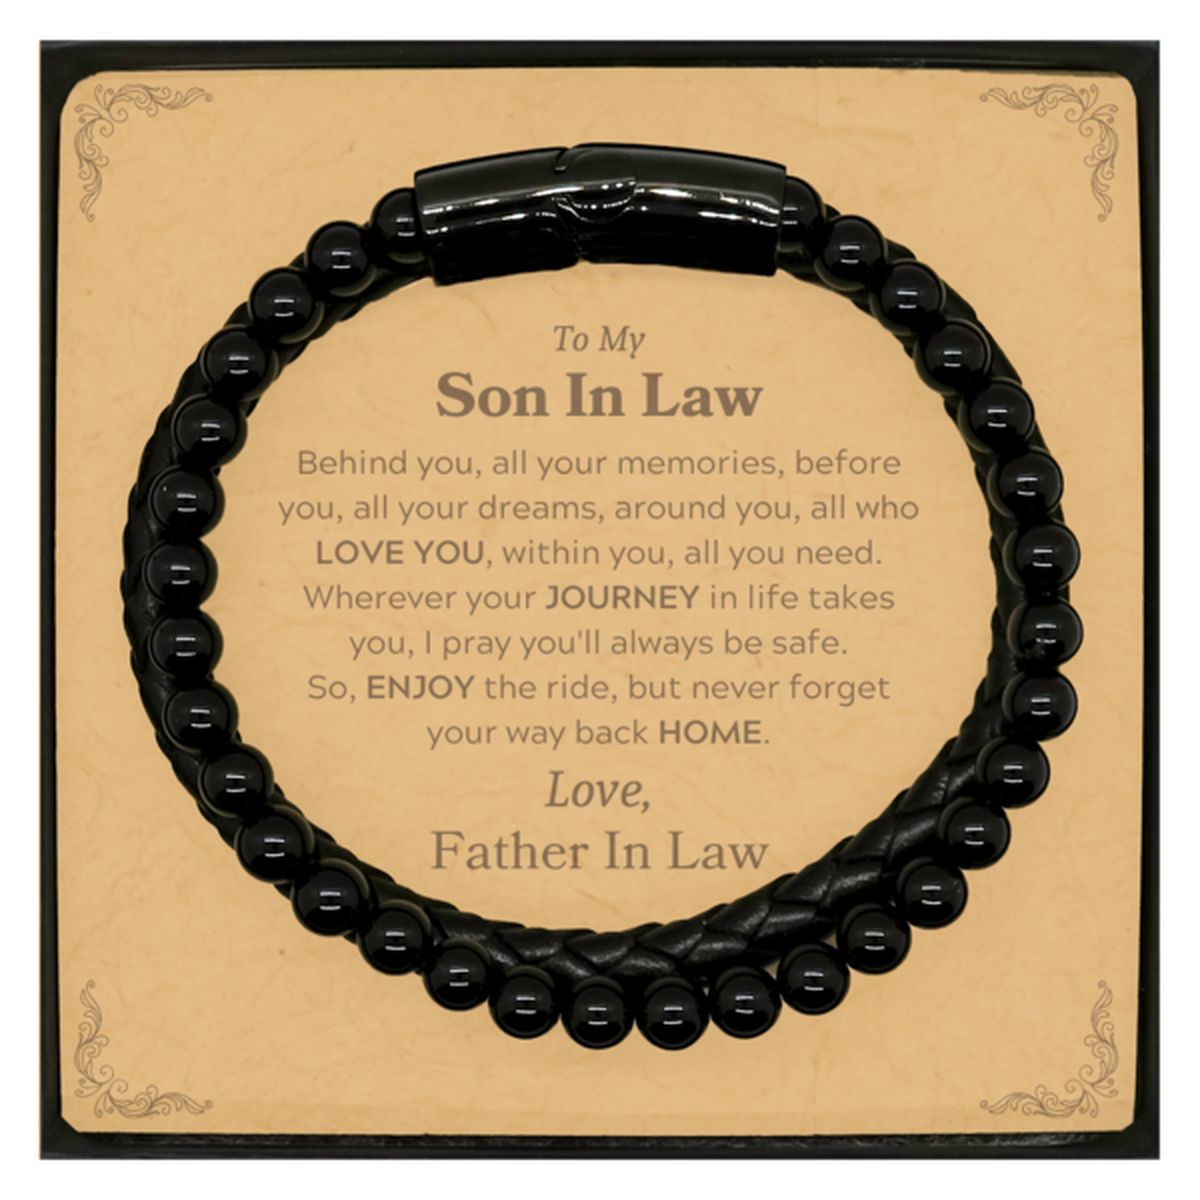 To My Son In Law Graduation Gifts from Father In Law, Son In Law Stone Leather Bracelets Christmas Birthday Gifts for Son In Law Behind you, all your memories, before you, all your dreams. Love, Father In Law